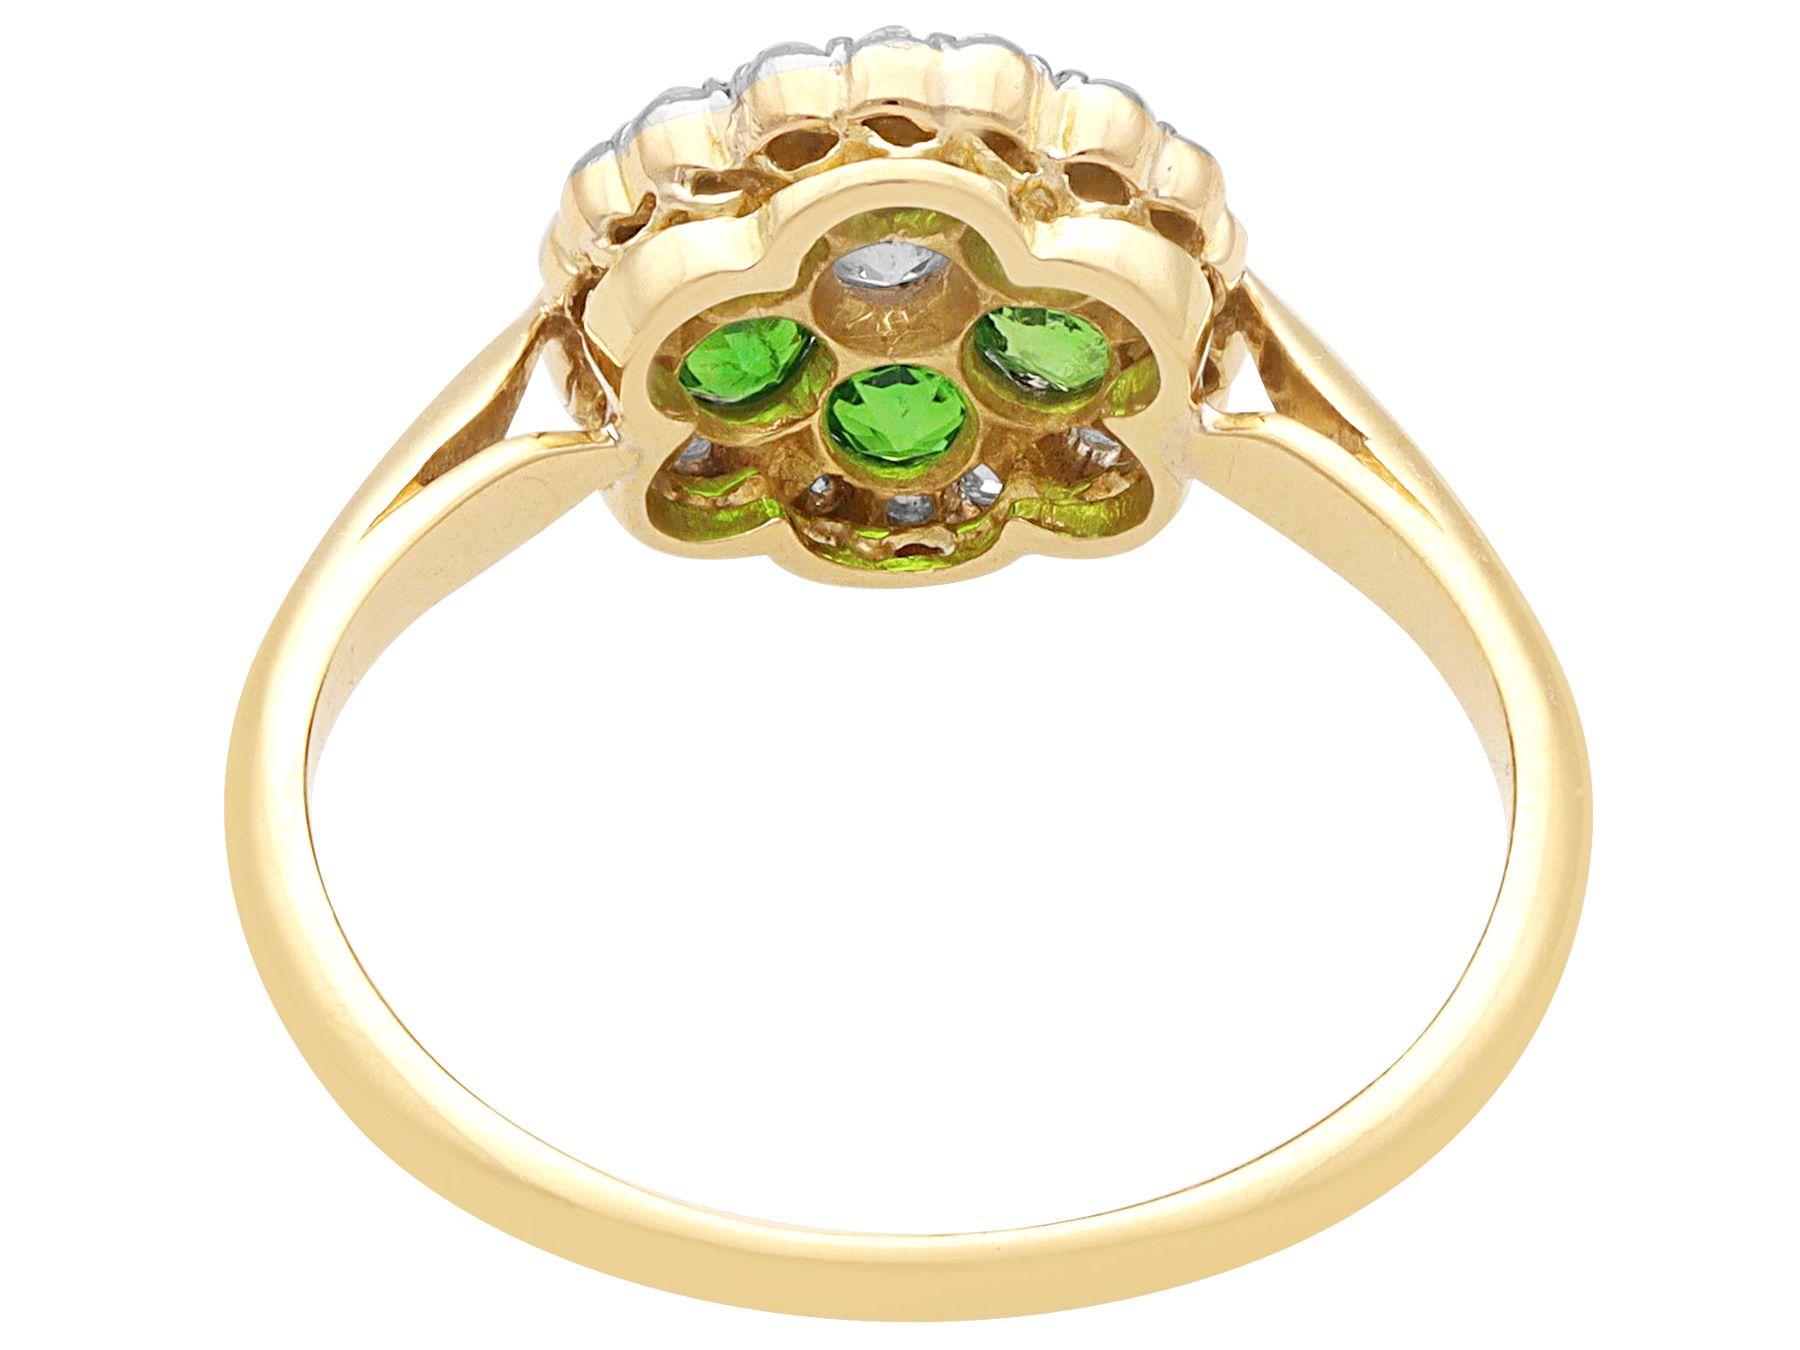 Antique Diamond and Demantoid Garnet Yellow Gold Cocktail Ring Circa 1910 In Excellent Condition For Sale In Jesmond, Newcastle Upon Tyne